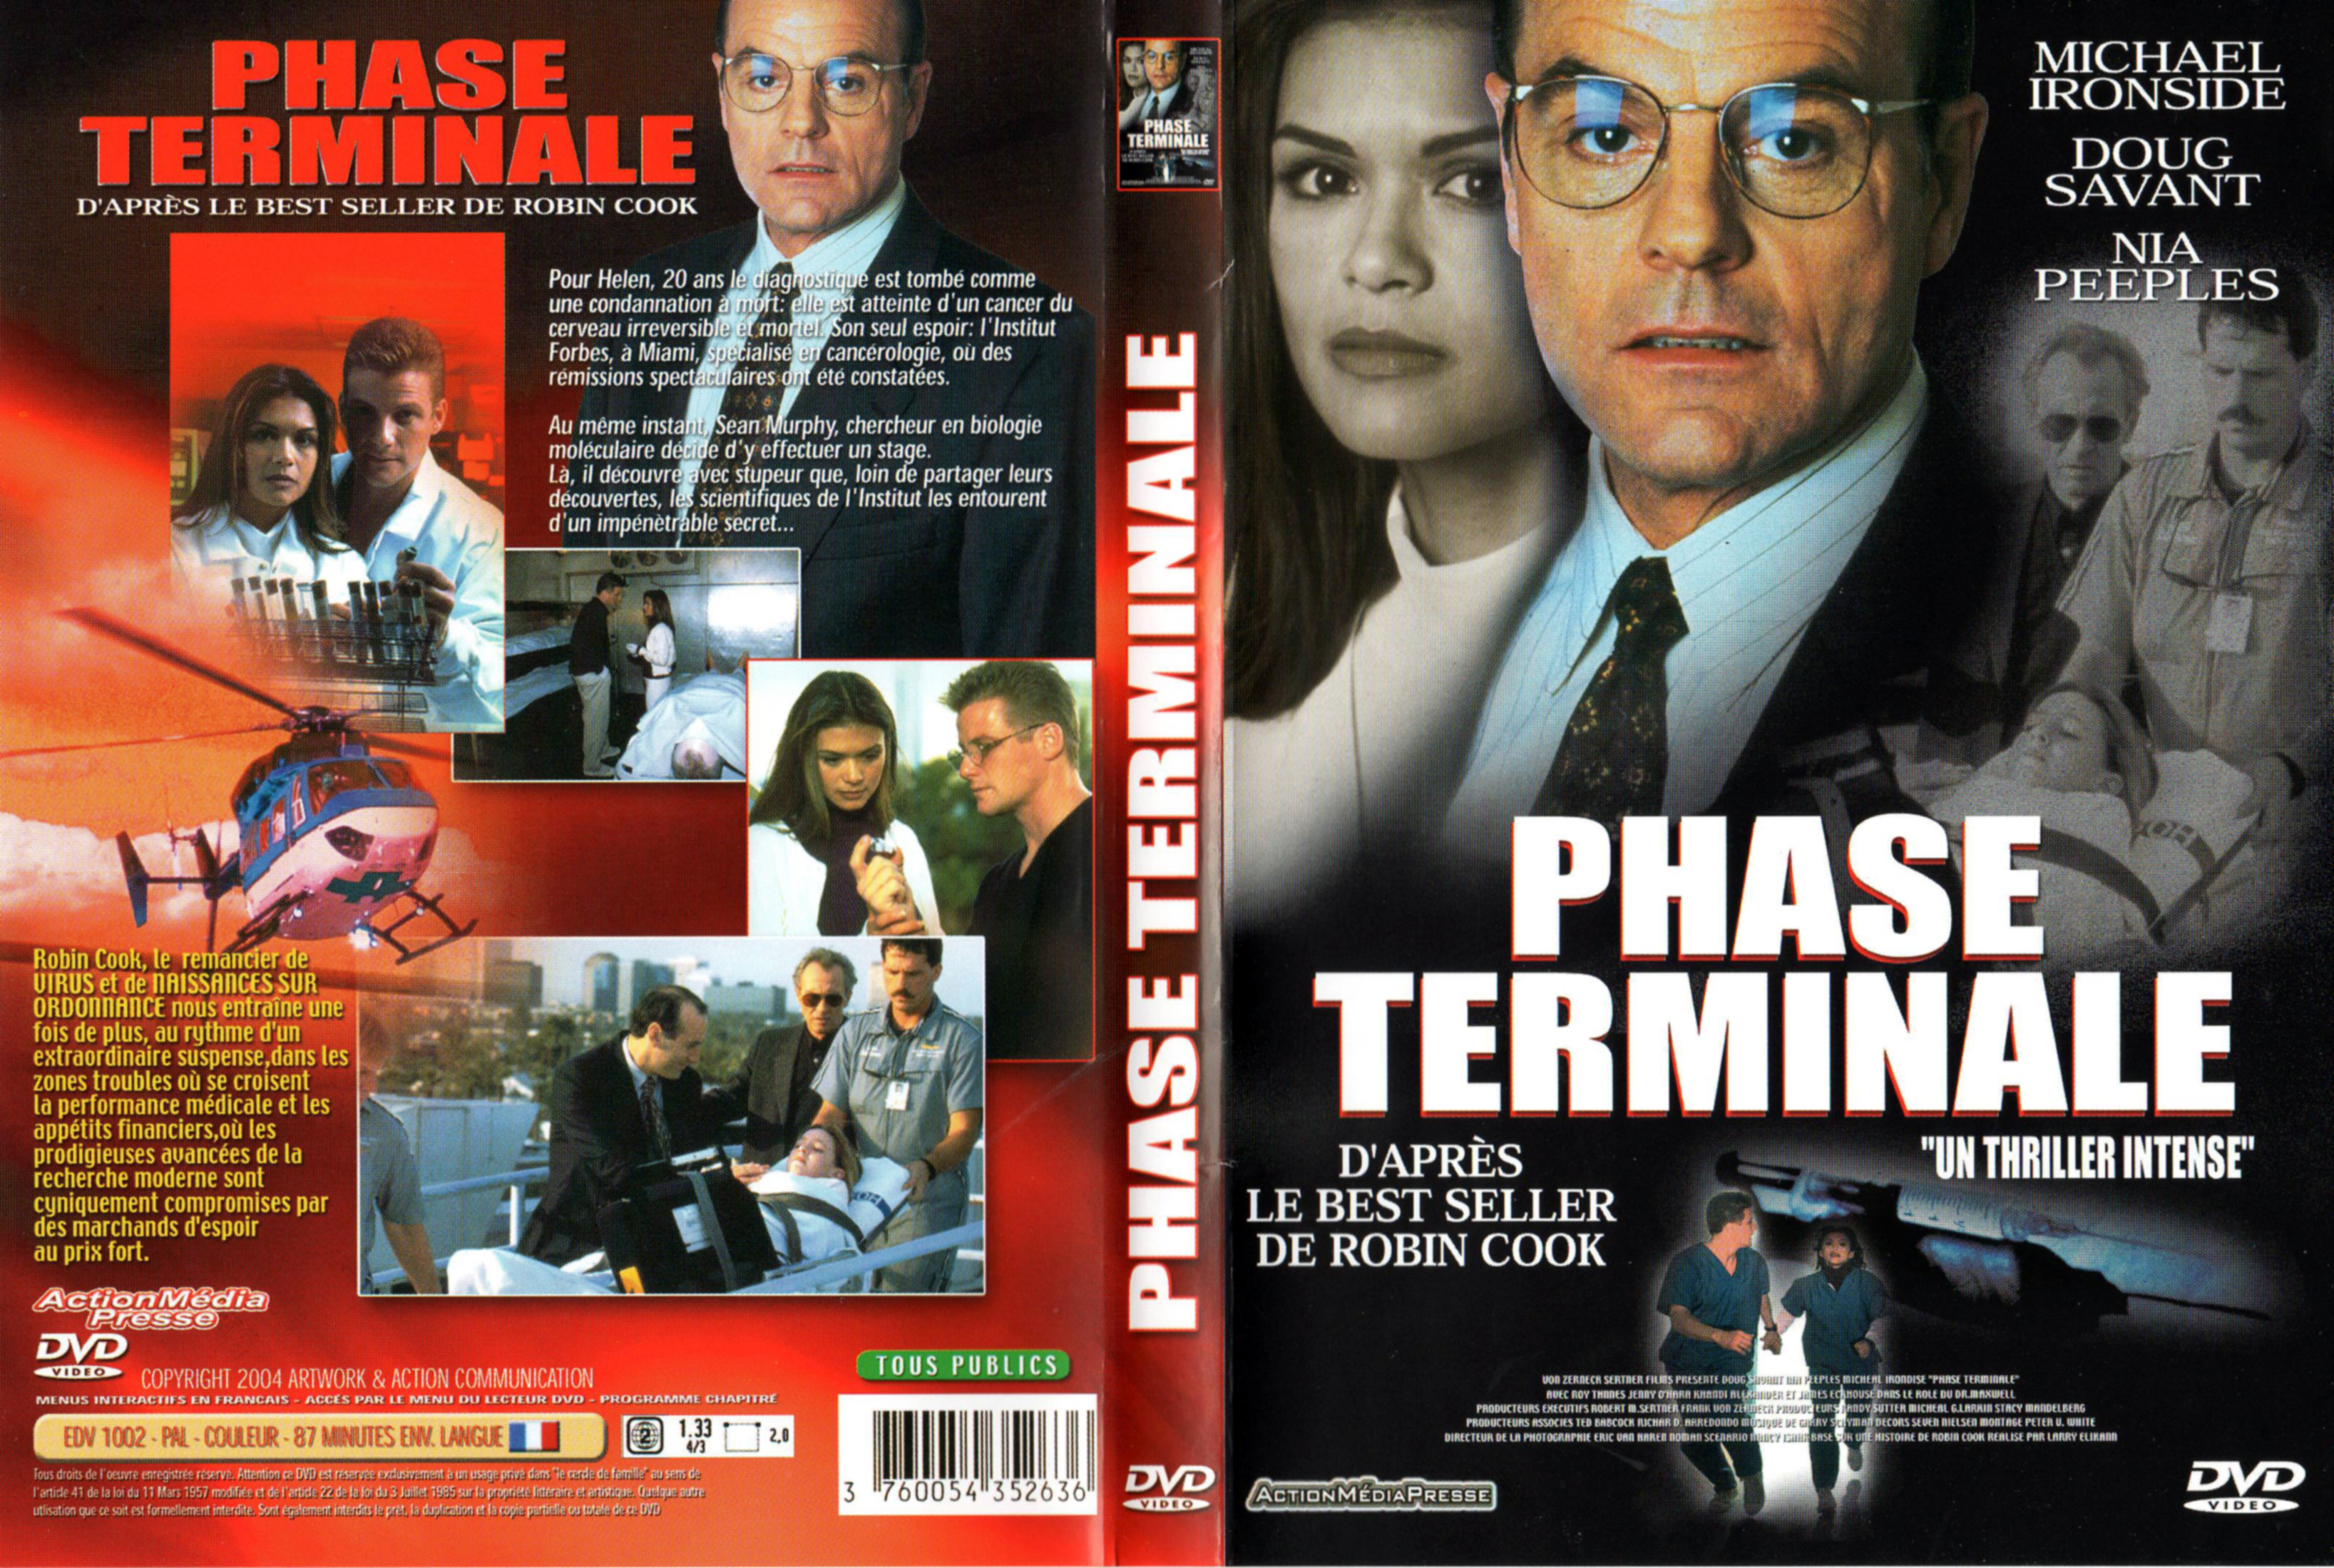 Jaquette DVD Phase terminale